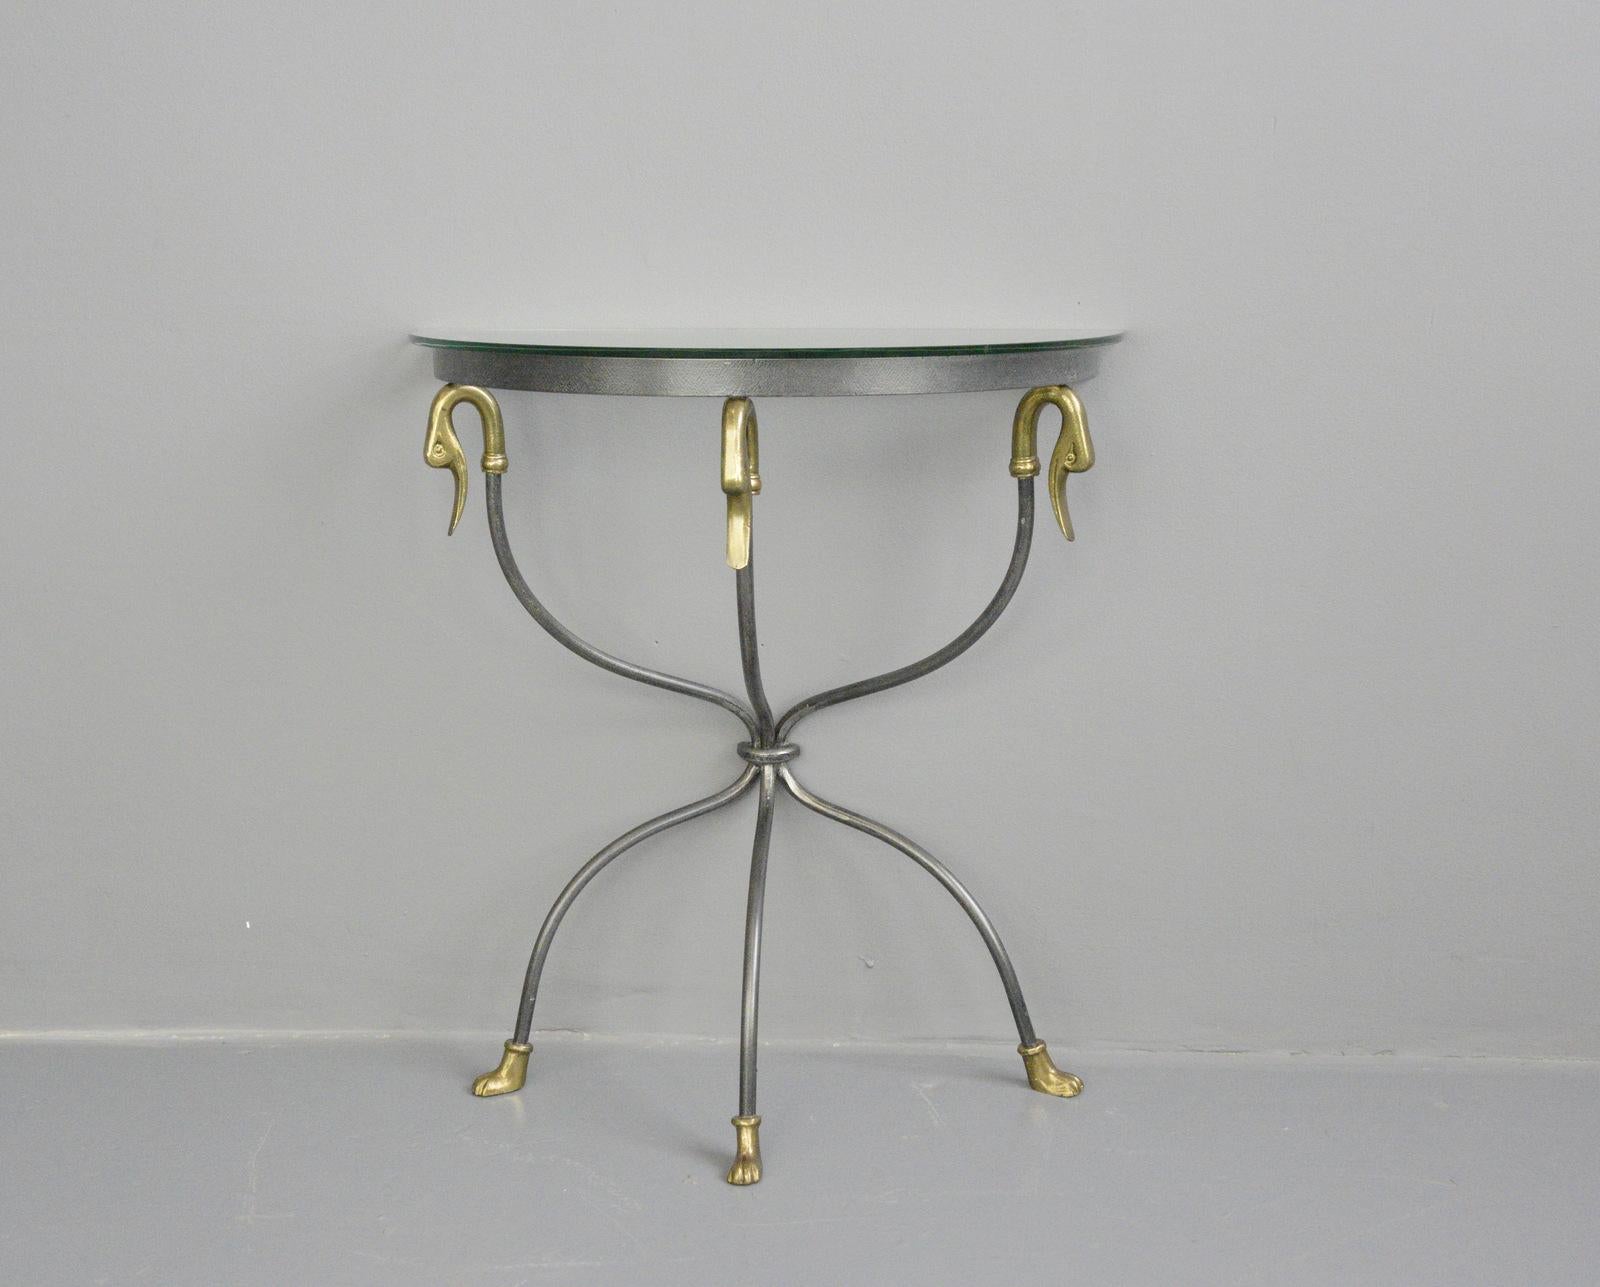 Midcentury Italian swan hallway table, circa 1950s

- Shaped wrought iron 
- Toughened glass top
- Brass feet
- Solid brass swan heads
- Italian, 1950s
- Measures: 64cm wide x 69cm tall x 32cm deep

Condition report

Cleaned and